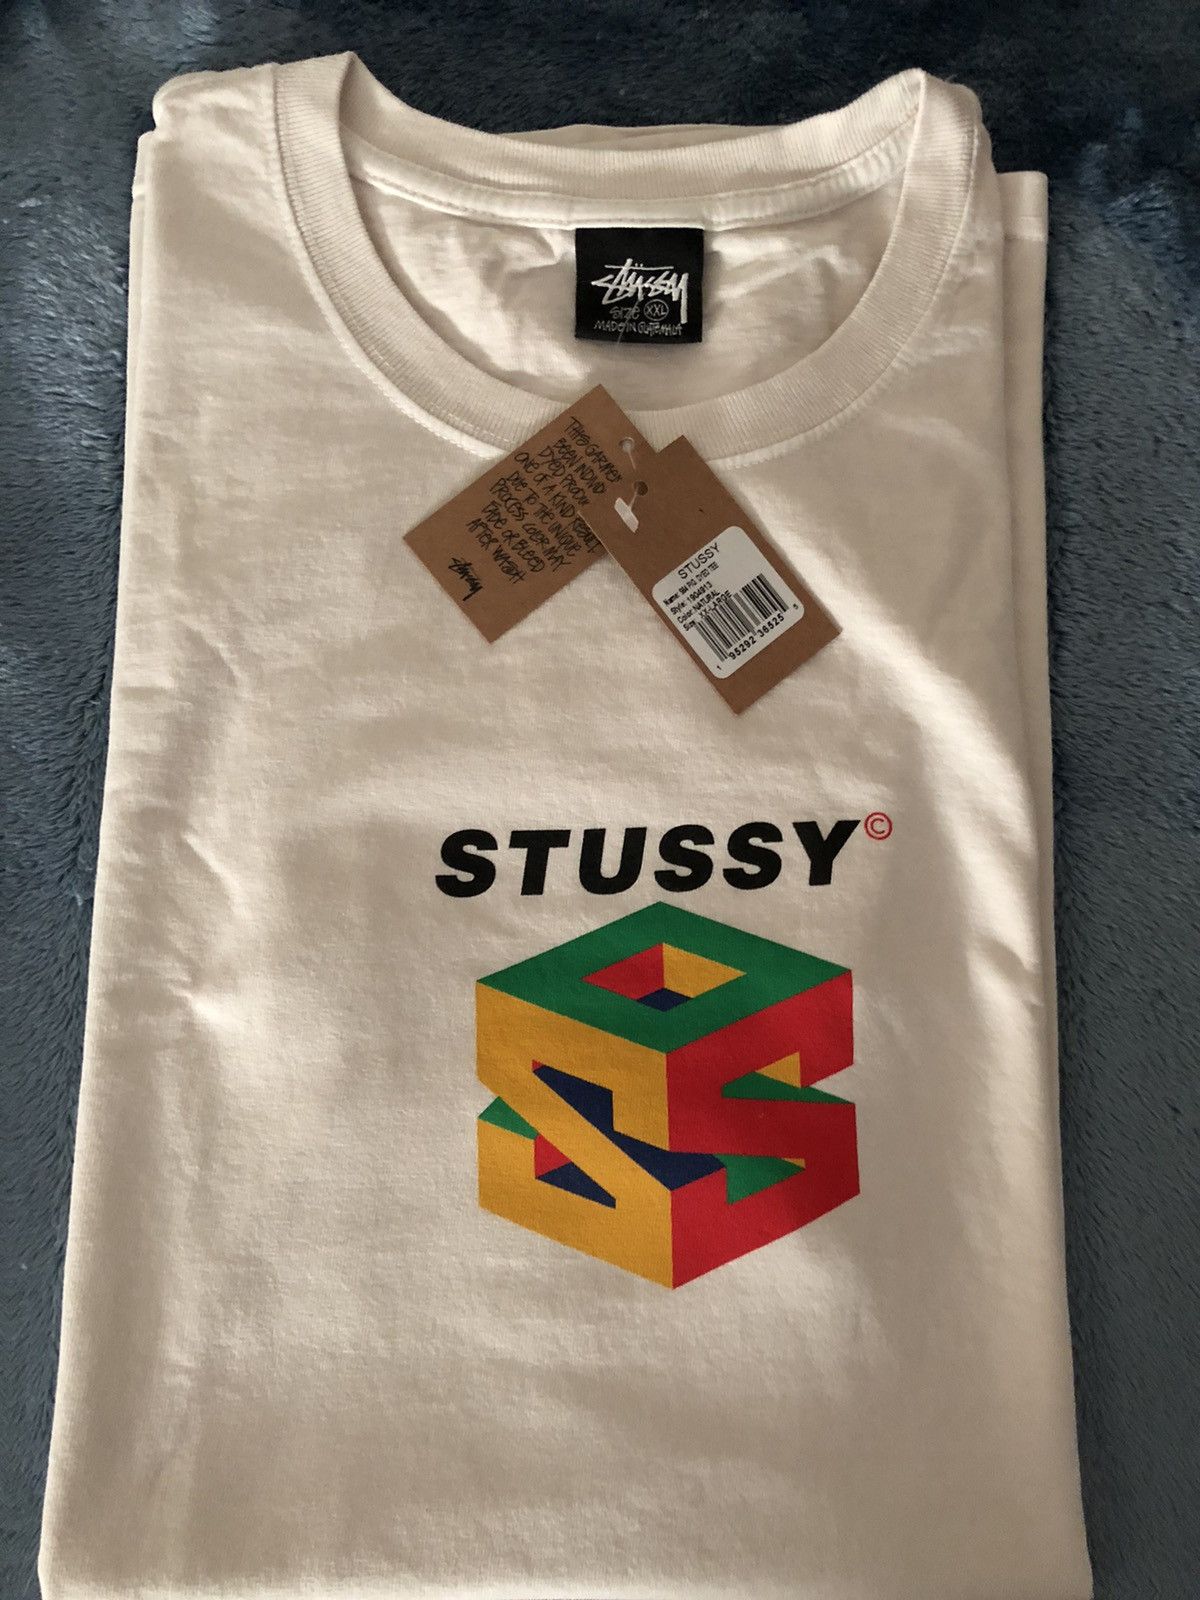 Stussy Stussy S64 PIGMENT DYED TEE | Grailed